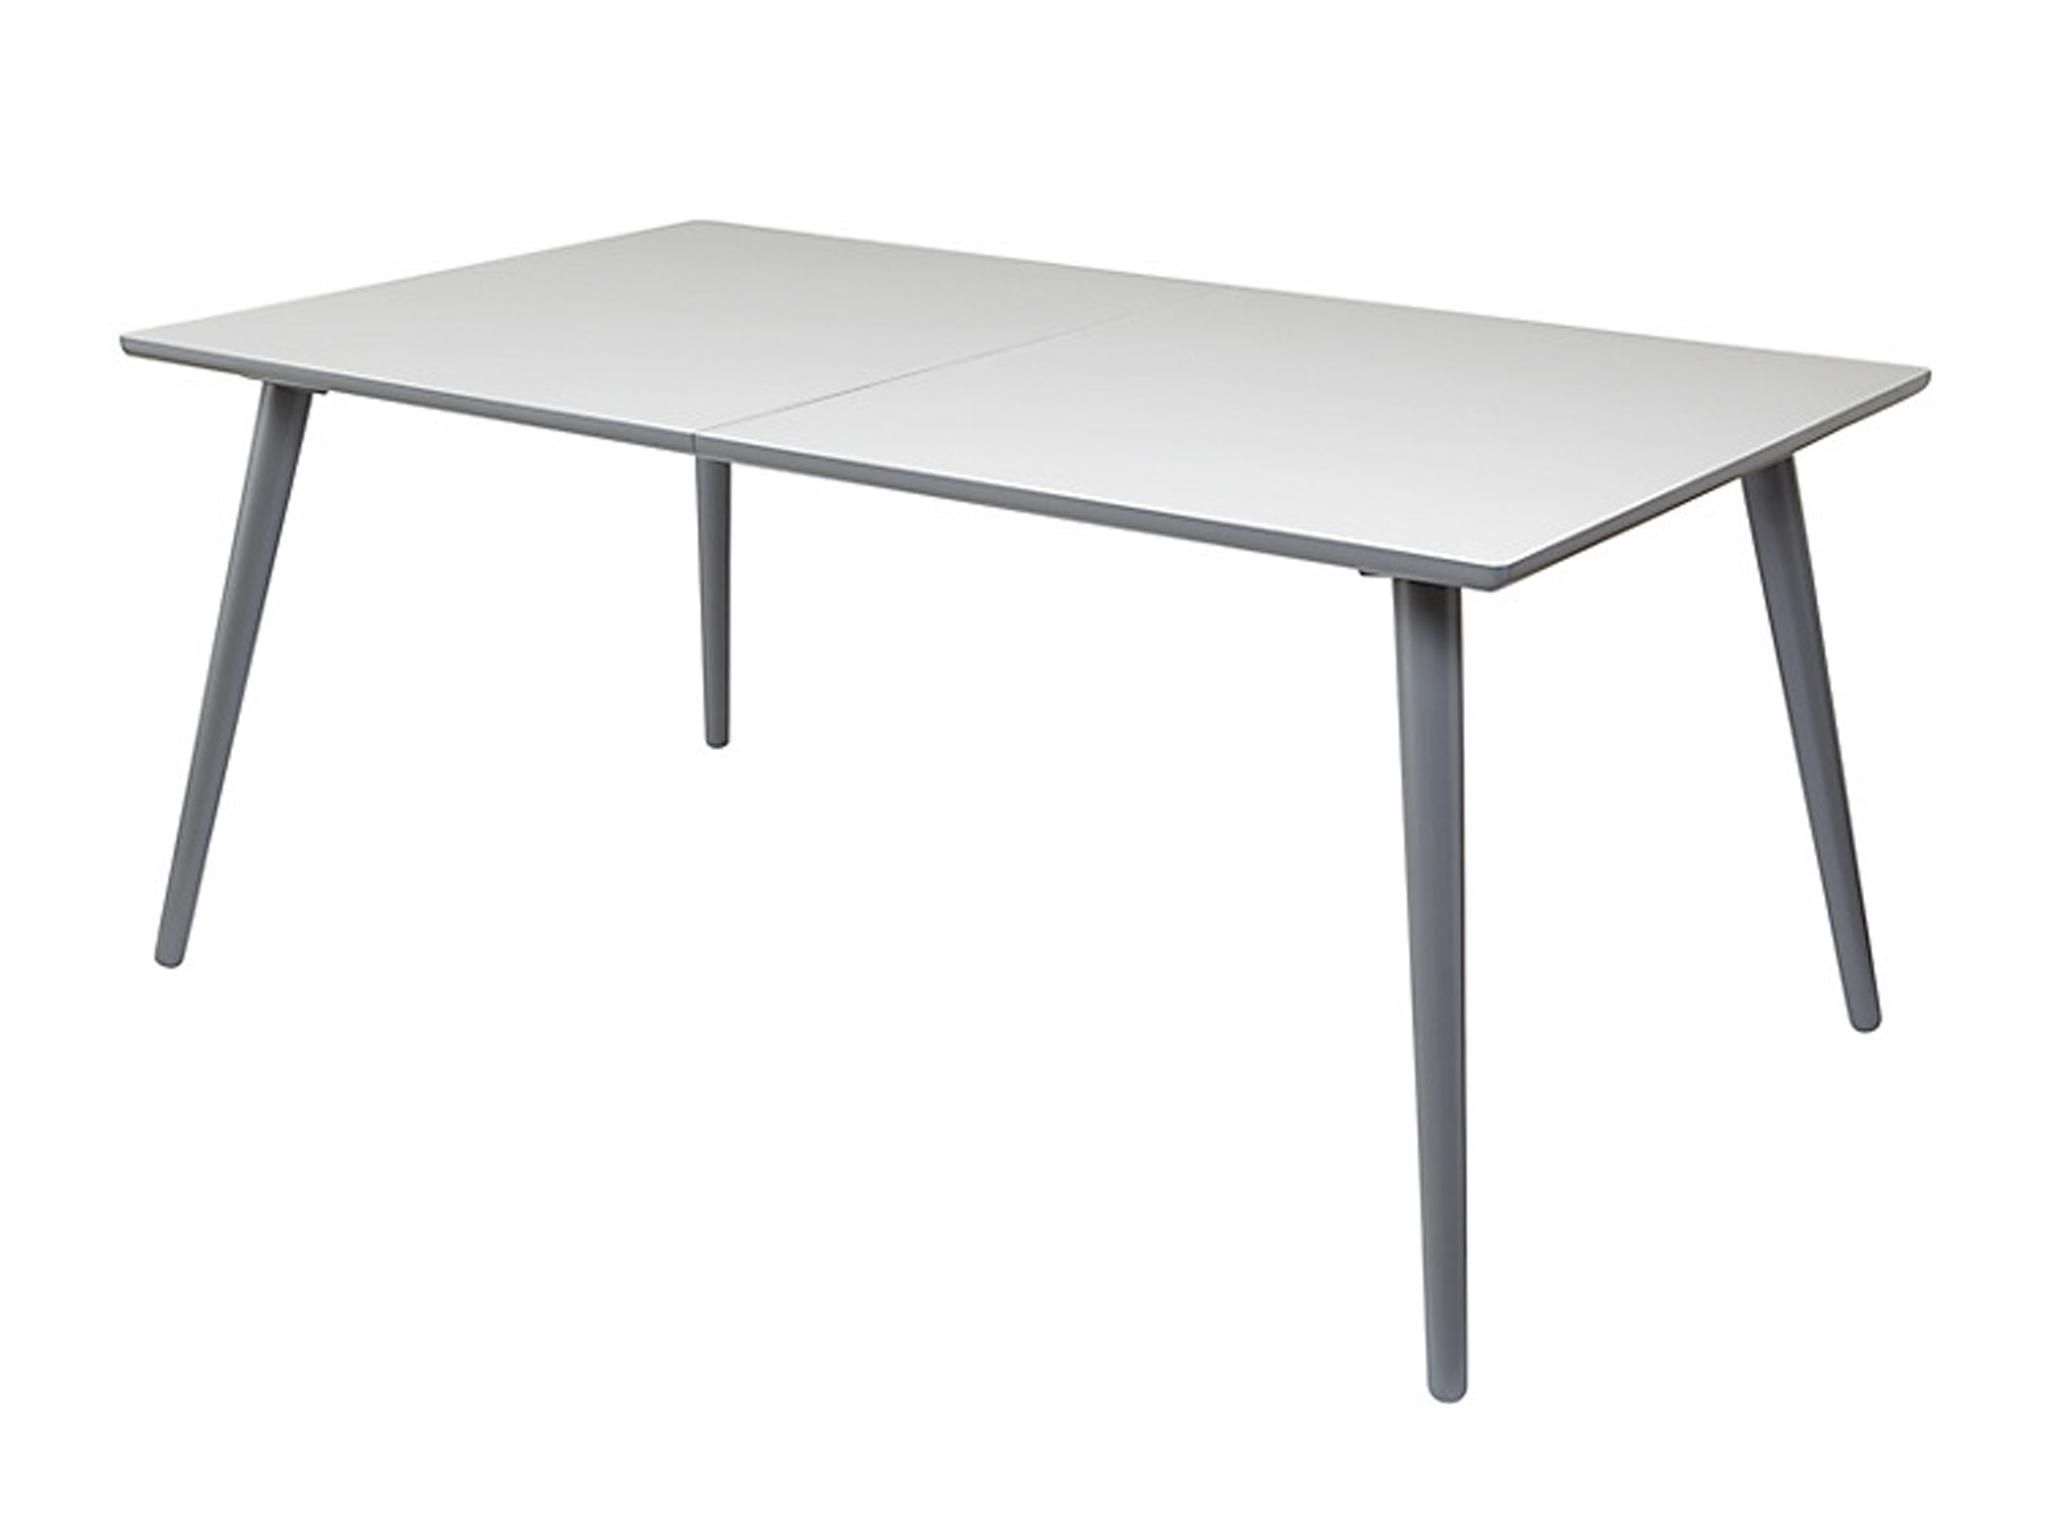 White Extendable Dining Tables Intended For Most Up To Date 10 Best Extendable Dining Tables (View 15 of 25)